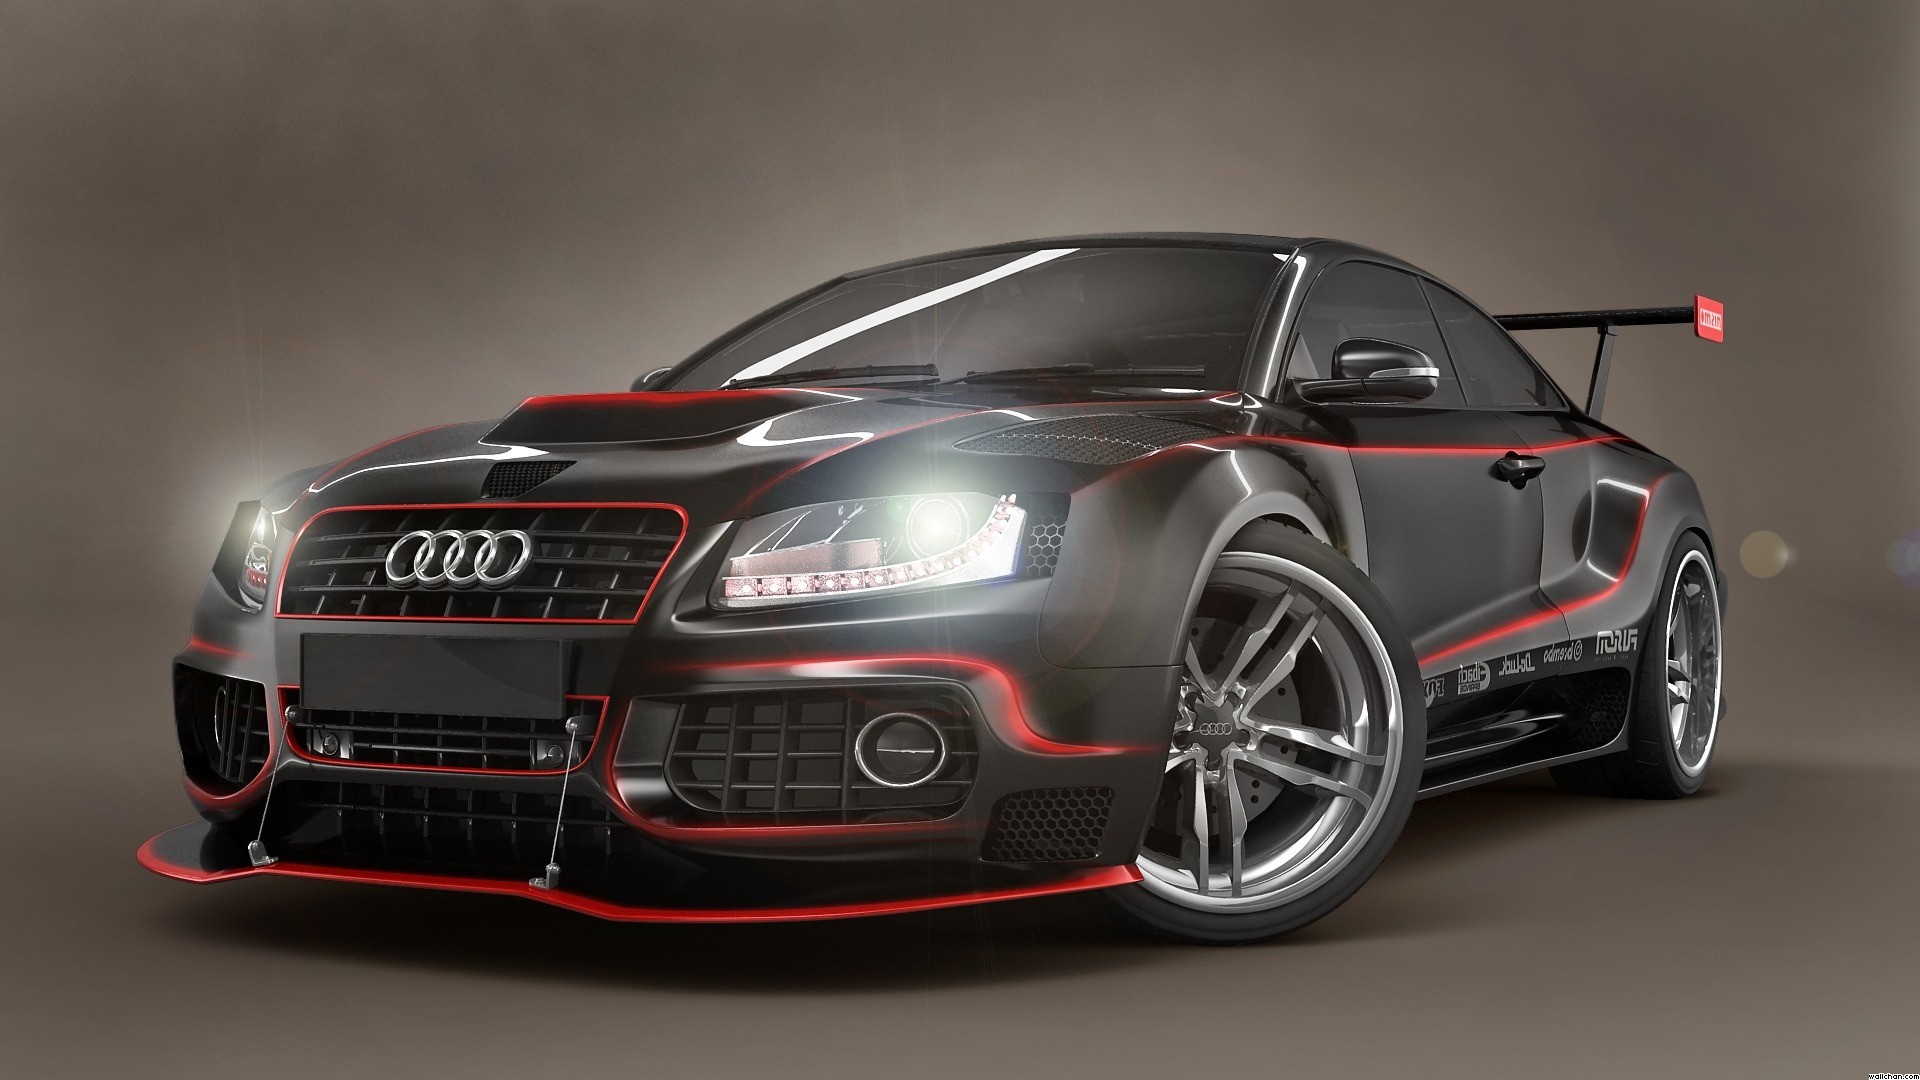 1920x1080 Audi Wallpapers High Quality